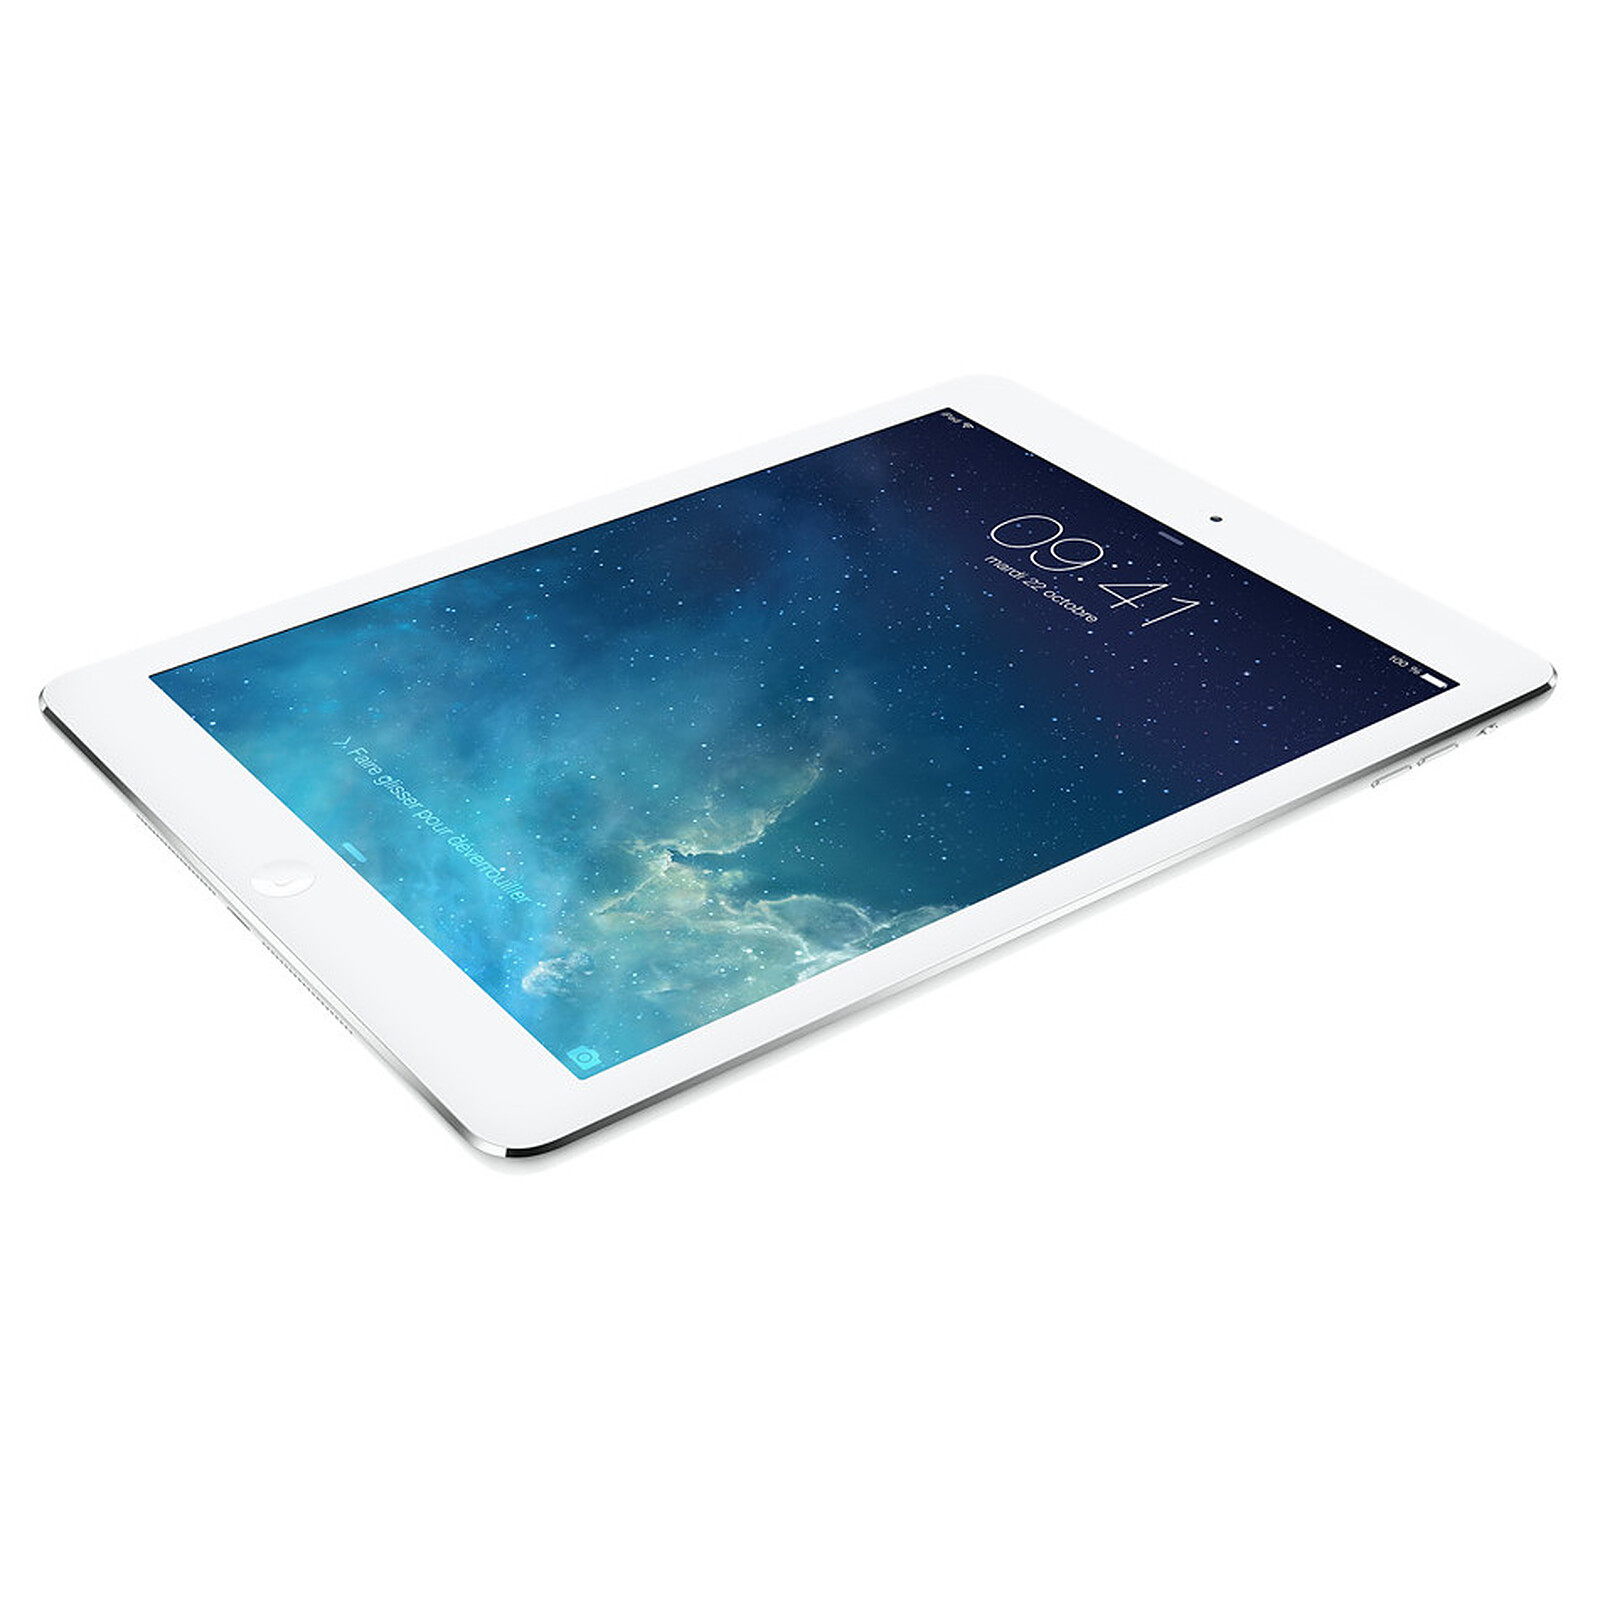 APPLE Tablette tactile iPad Air 2 WiFi - Or - 128 Go pas cher 